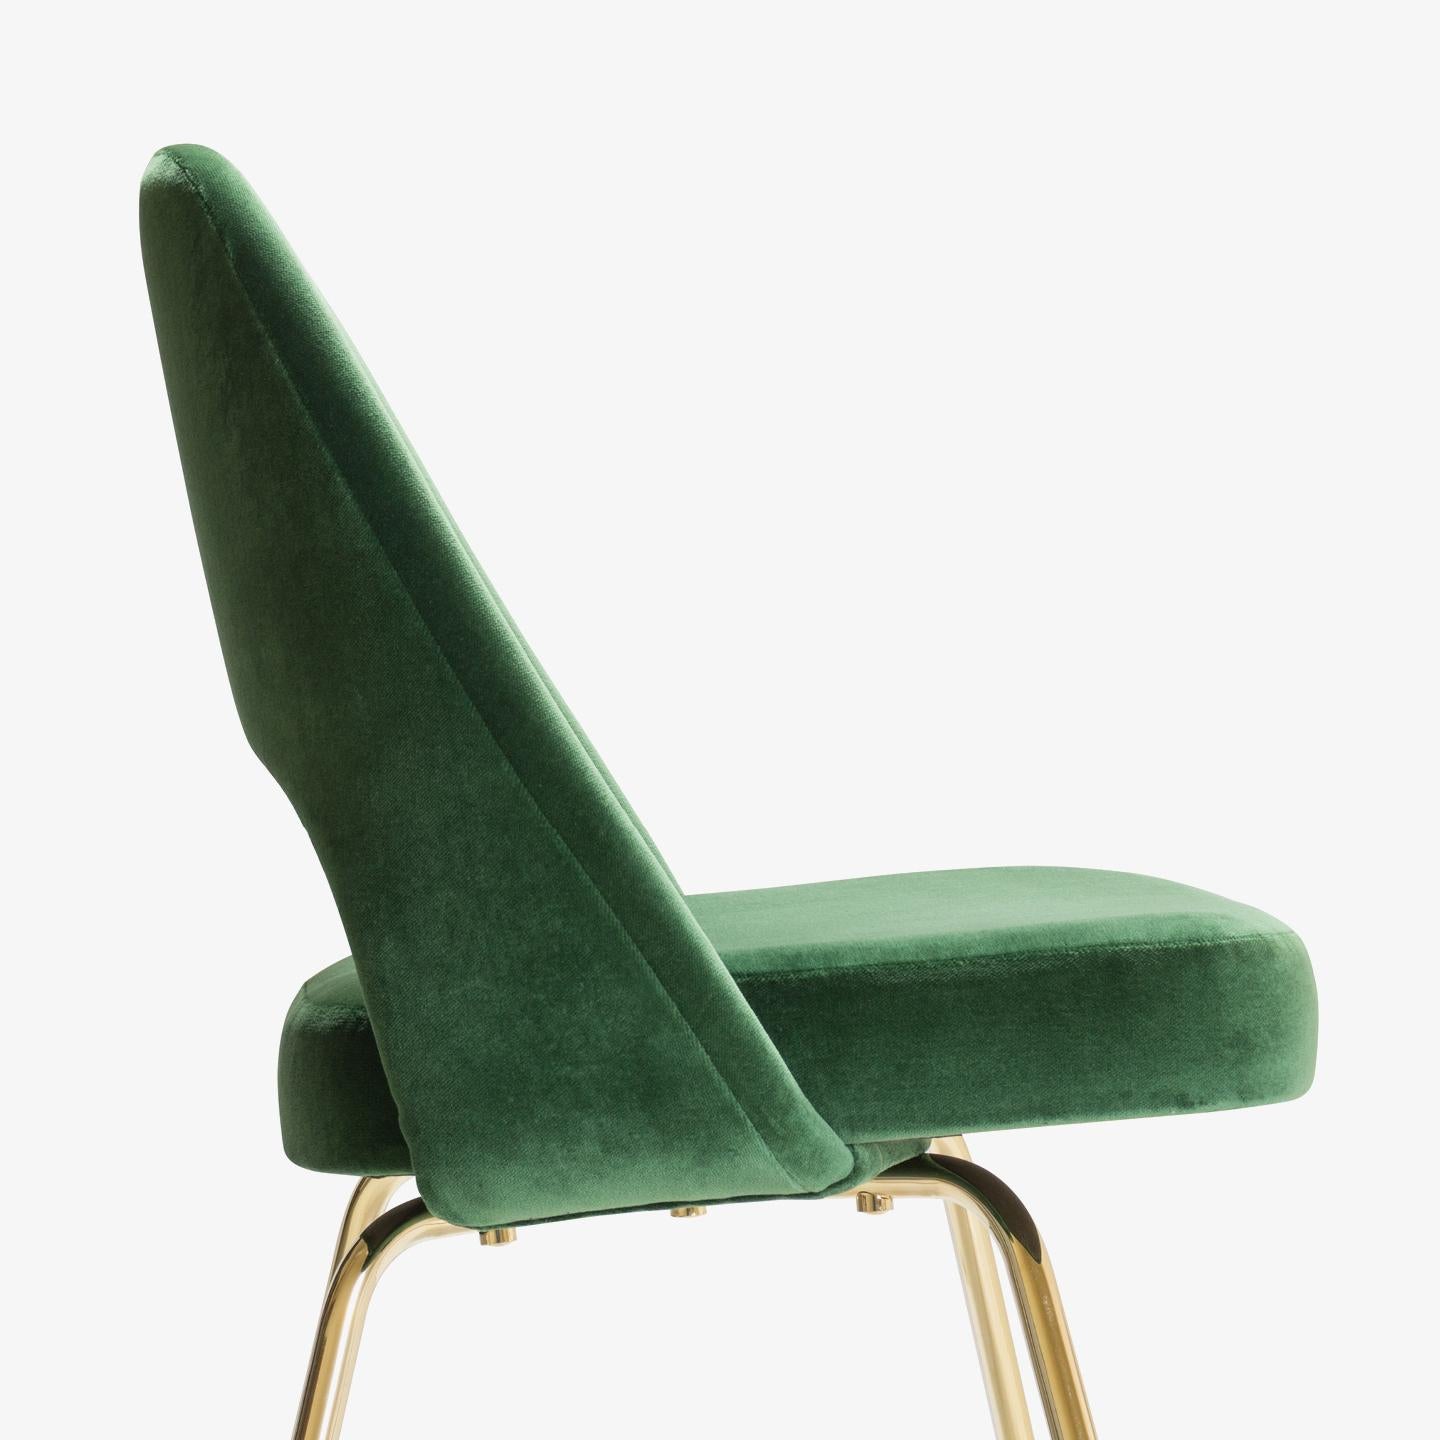 The next generation of Eero Saarinen's famed executive chairs have arrived, 100% authentic Eero Saarinen for Knoll Executive chairs completely restored ground-up with an extra touch of gold.

We've been restoring Saarinen Executive chairs for years